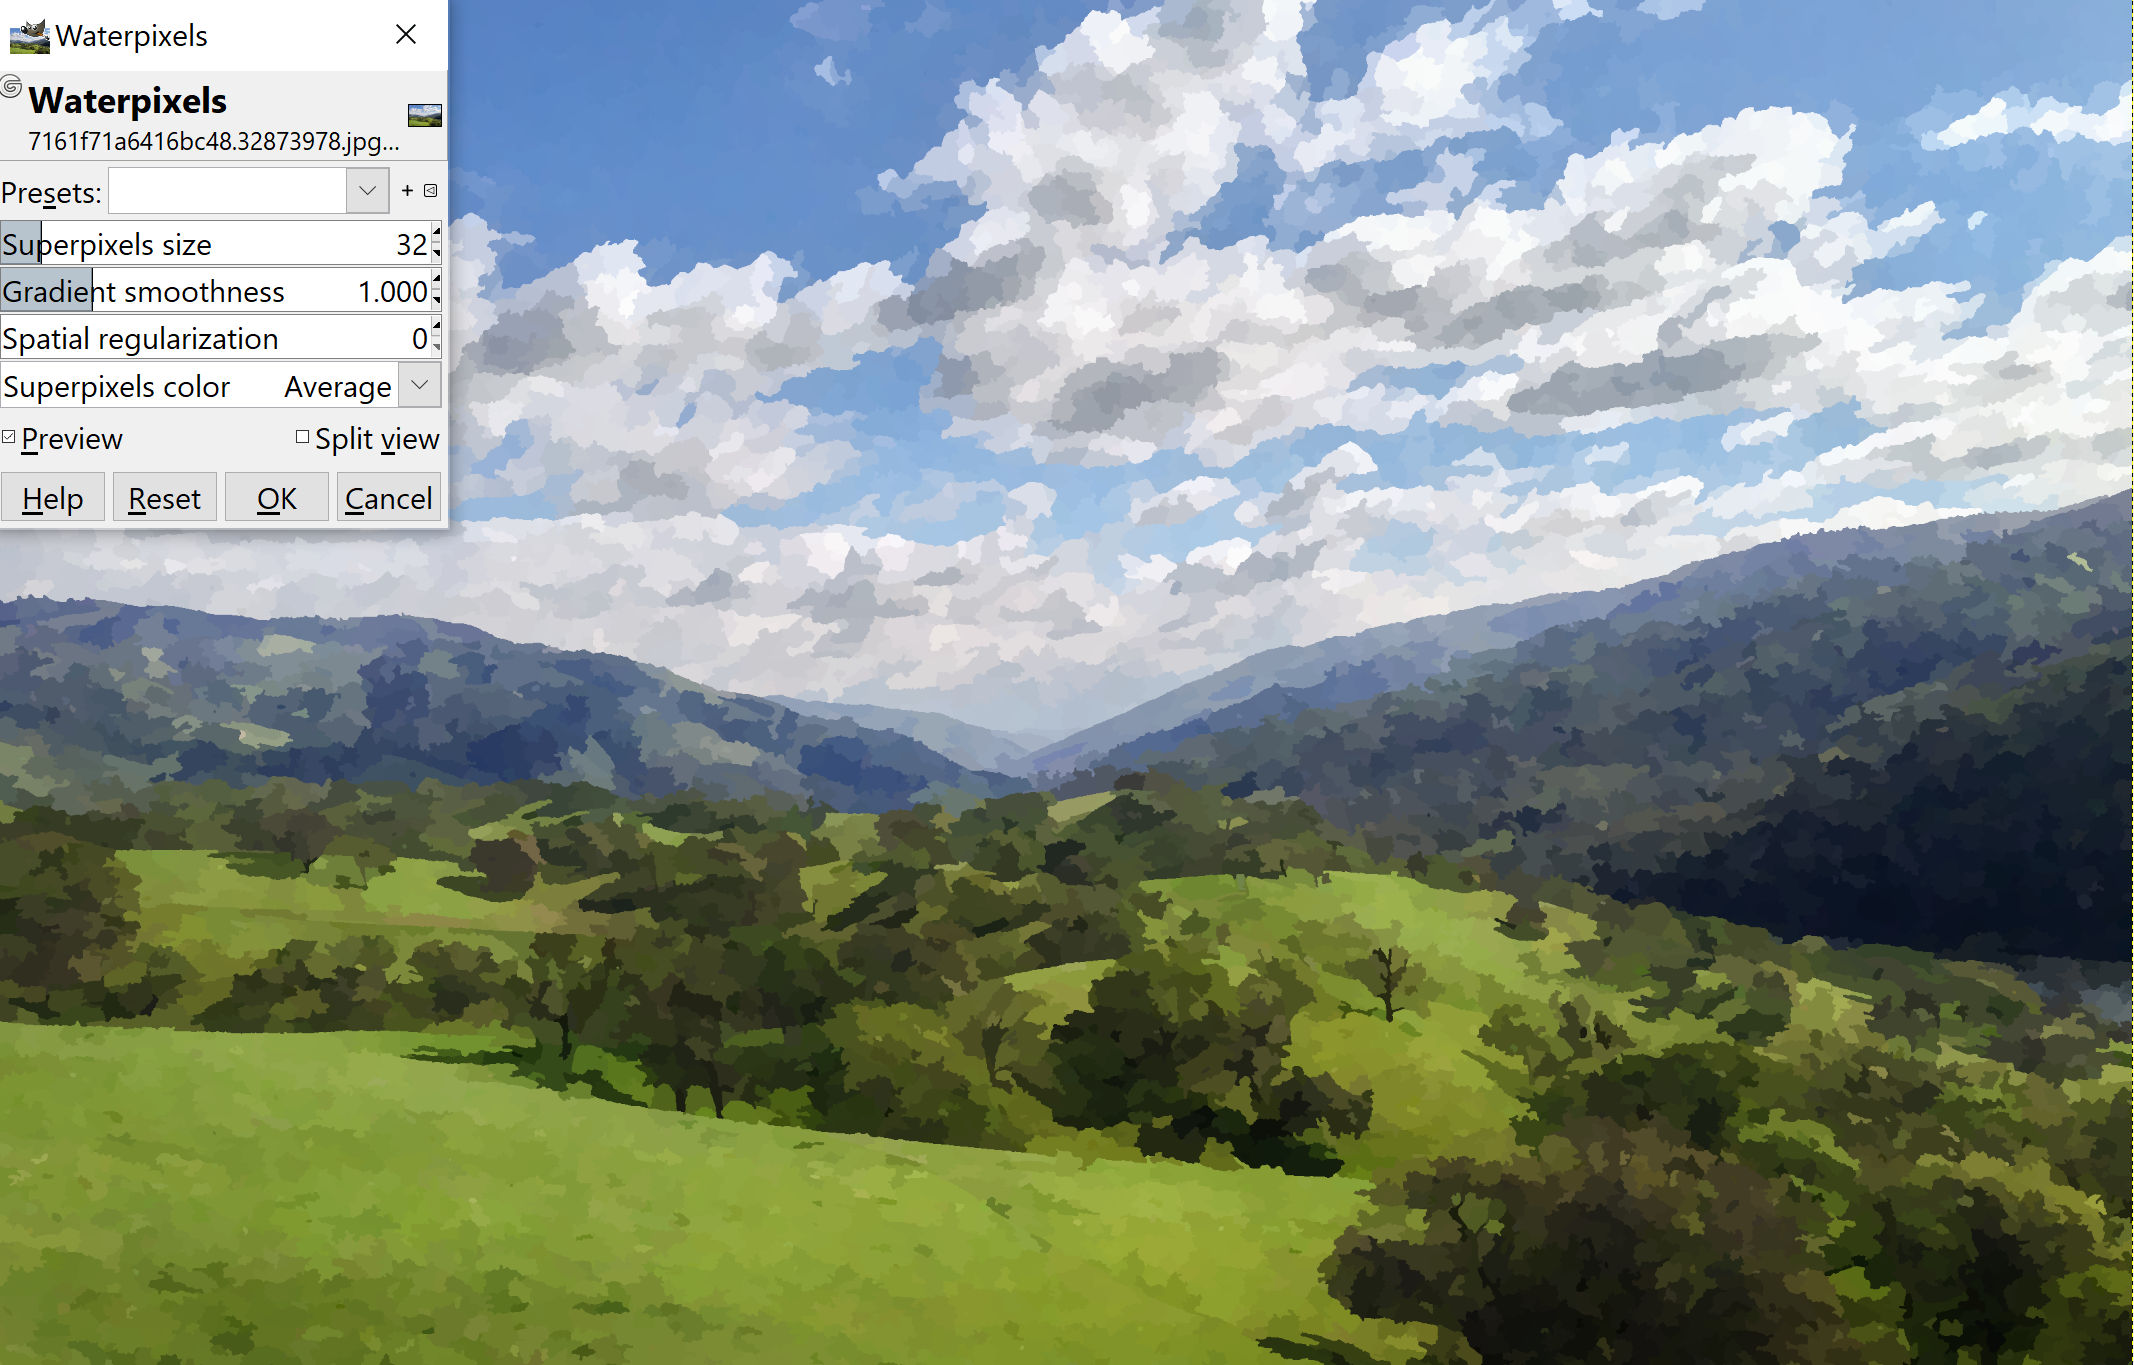 Canvas area of the GIMP photo-editing software with hills in front of a mountainside in the image.  In the top left corner is a control box for controlling a "waterpixels" artistic filter.